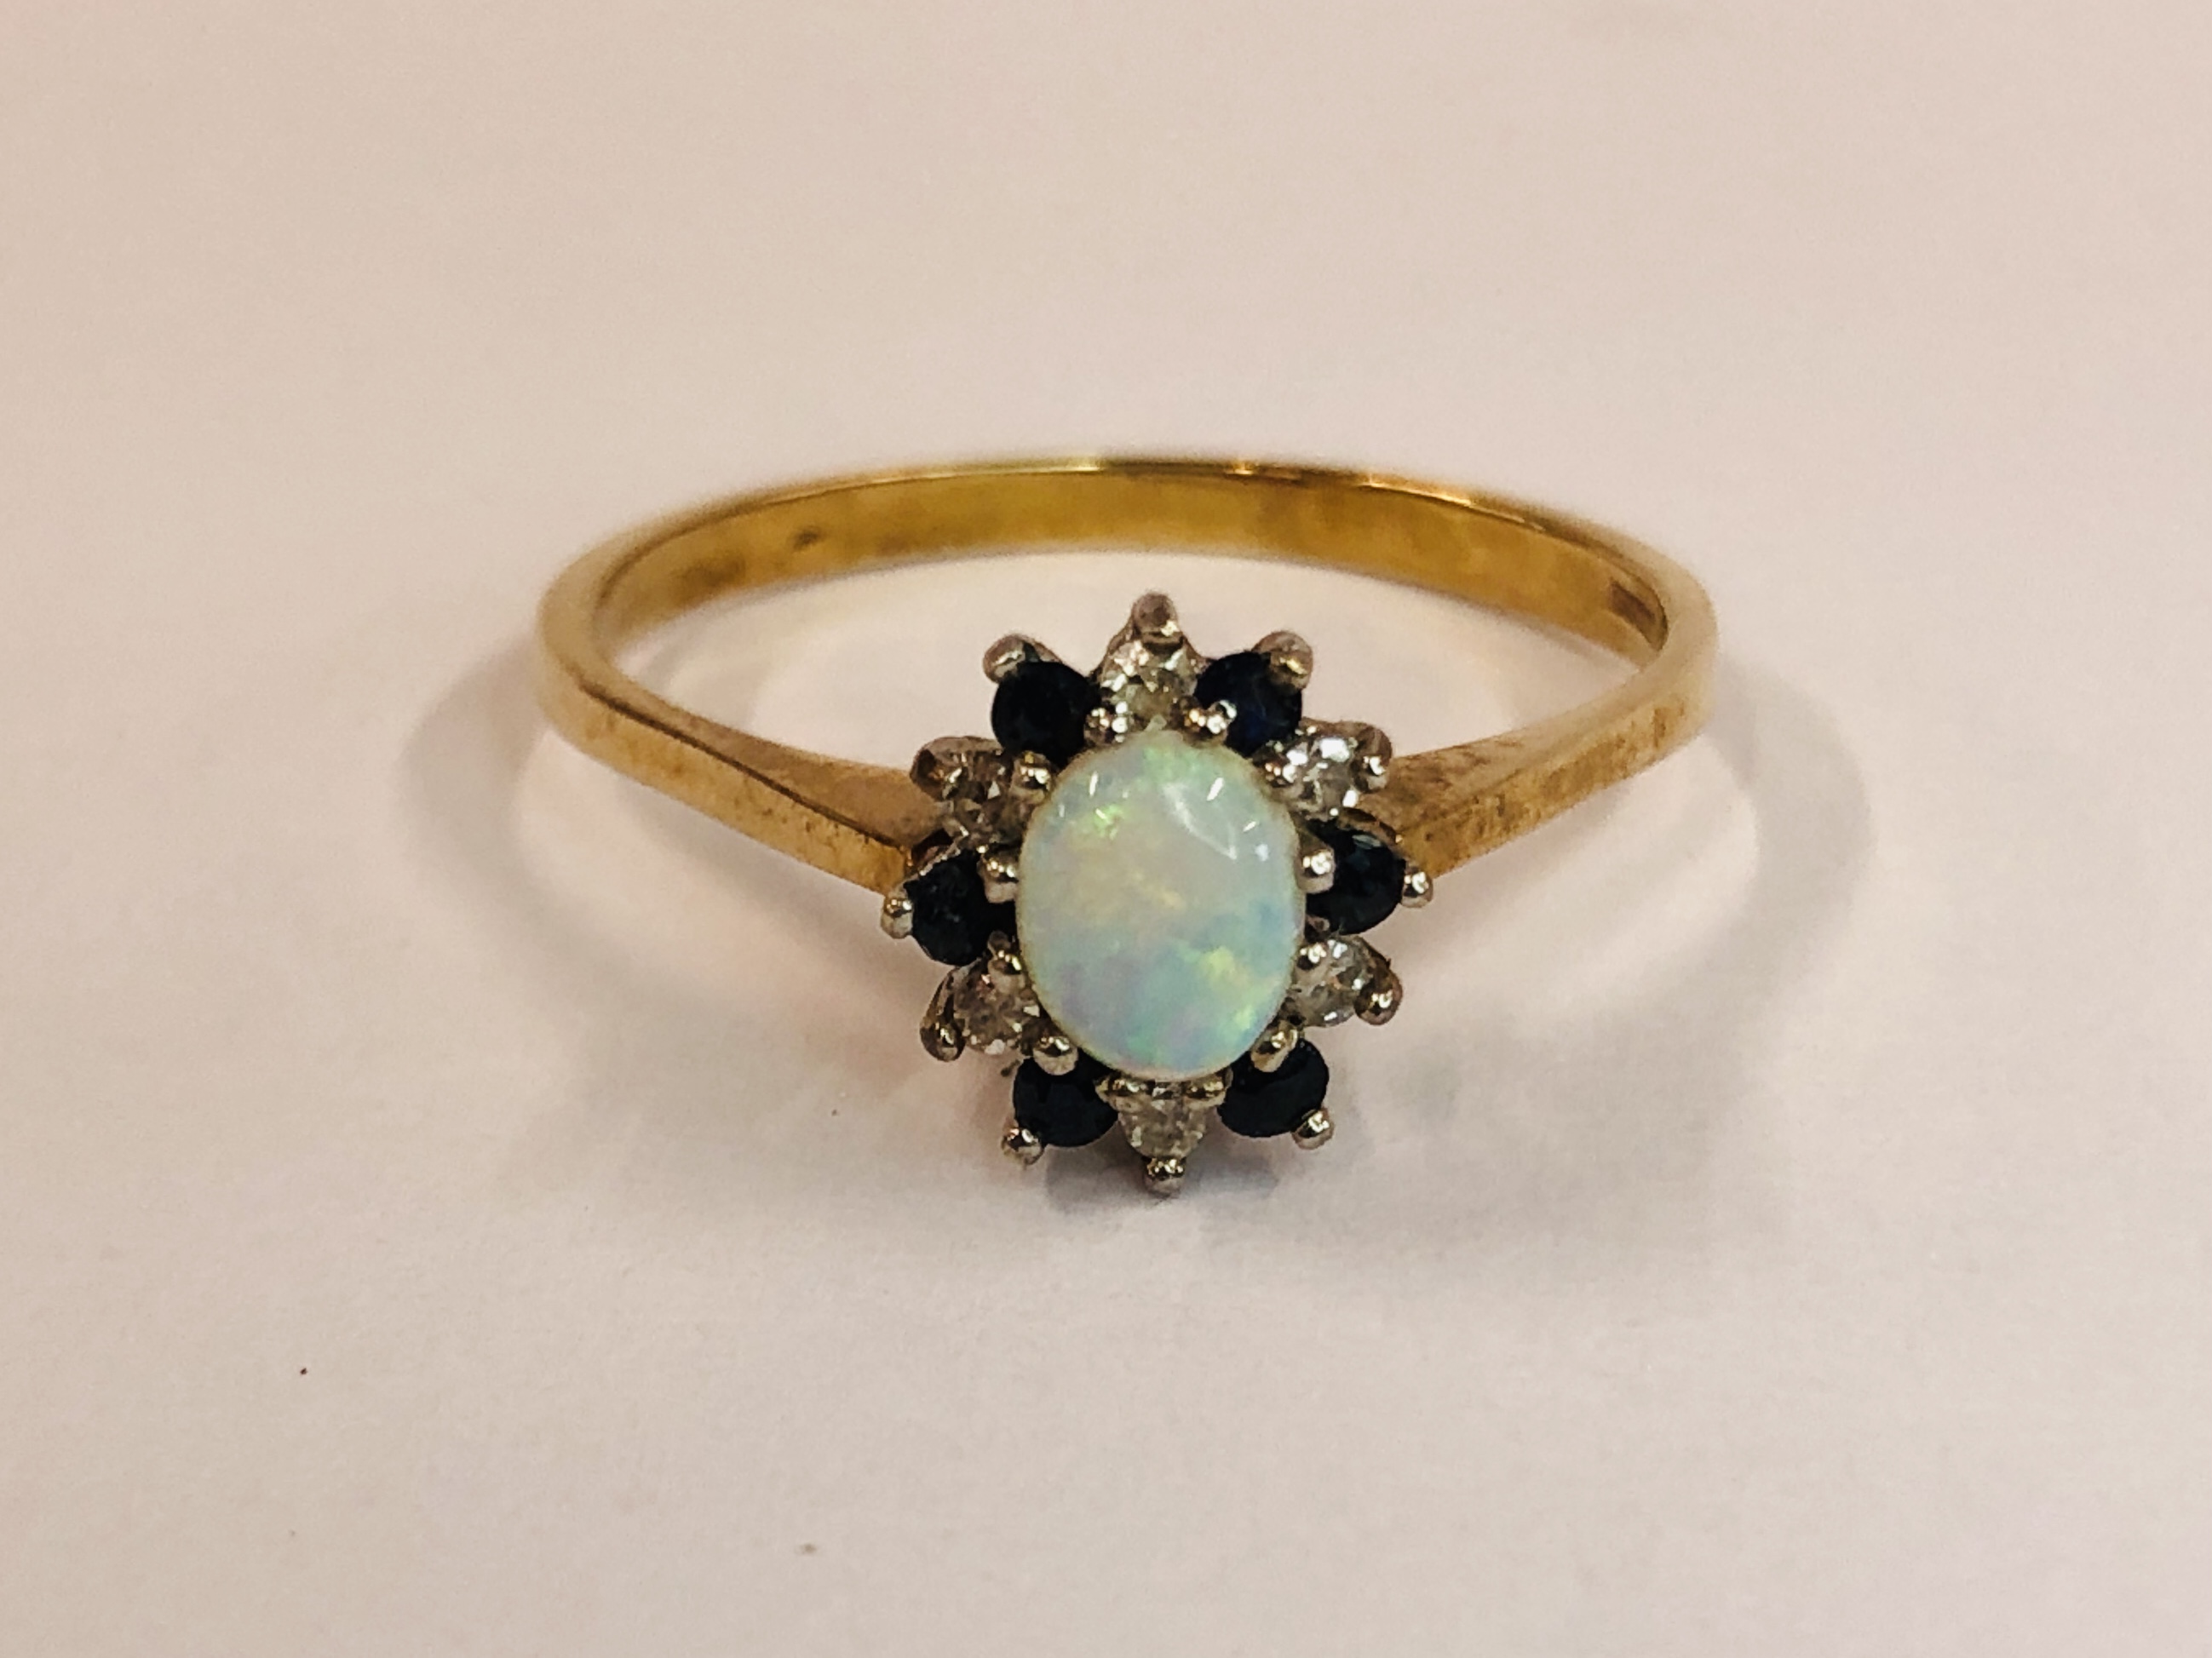 A 9CT GOLD RING SET WITH CENTRAL OVAL OPAL, SURROUNDED BY SMALLER DIAMONDS AND SAPPHIRES.